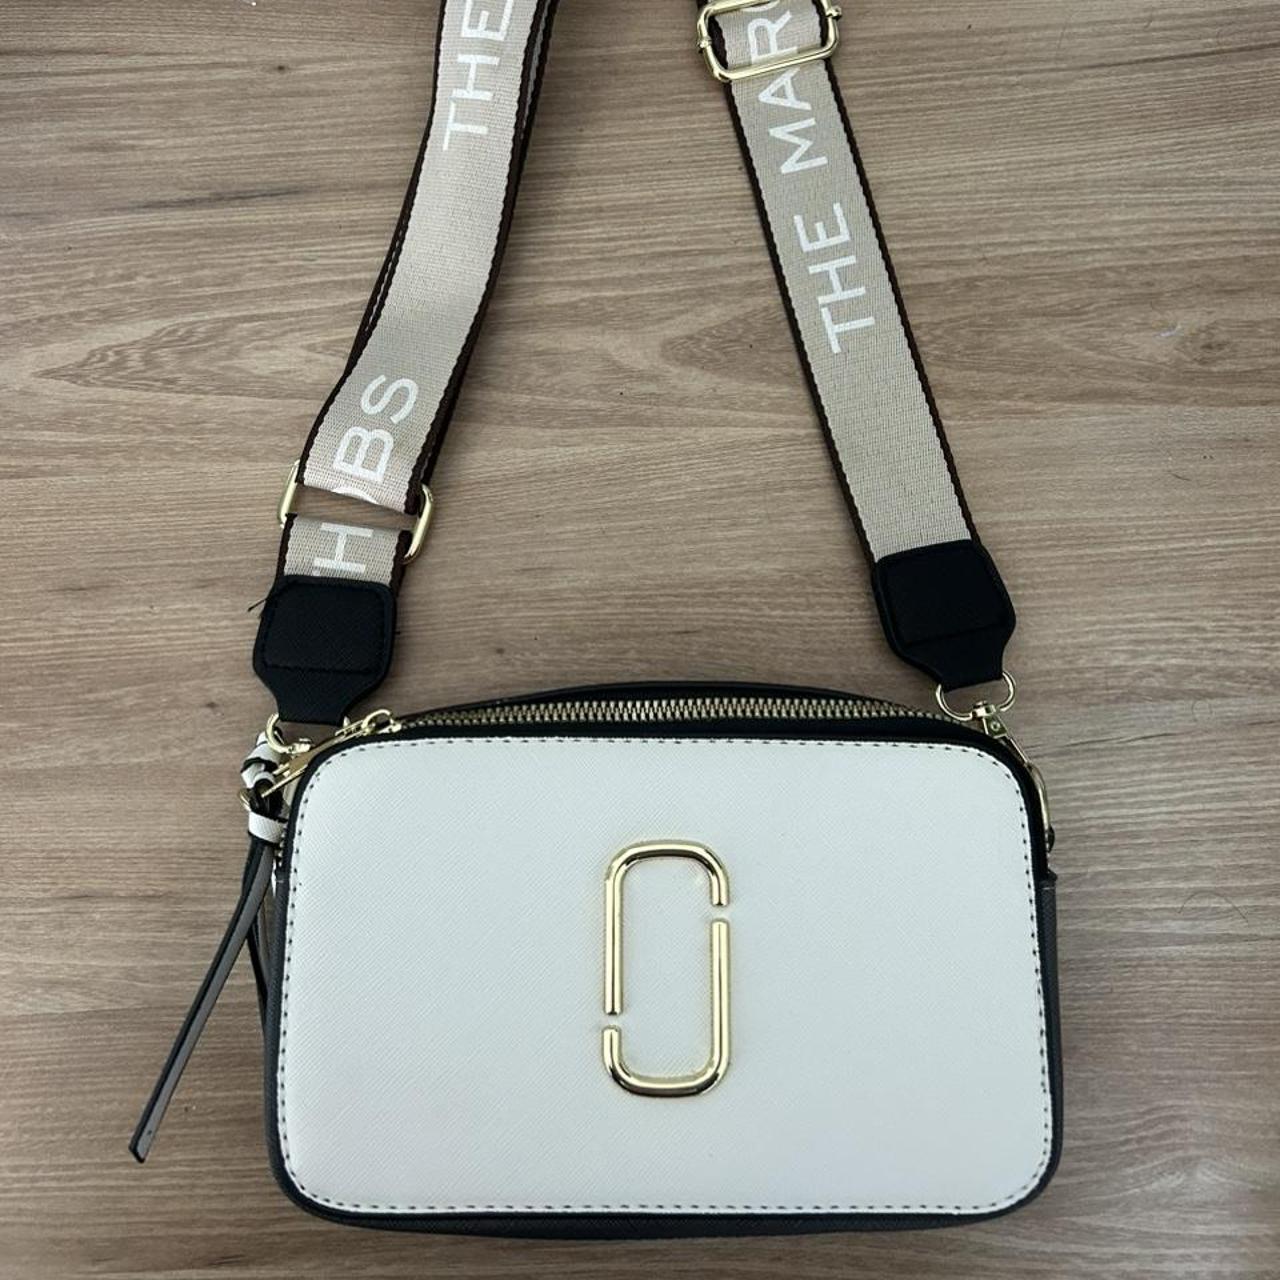 Marc Jacobs Snapshot purse This is still brand new - Depop